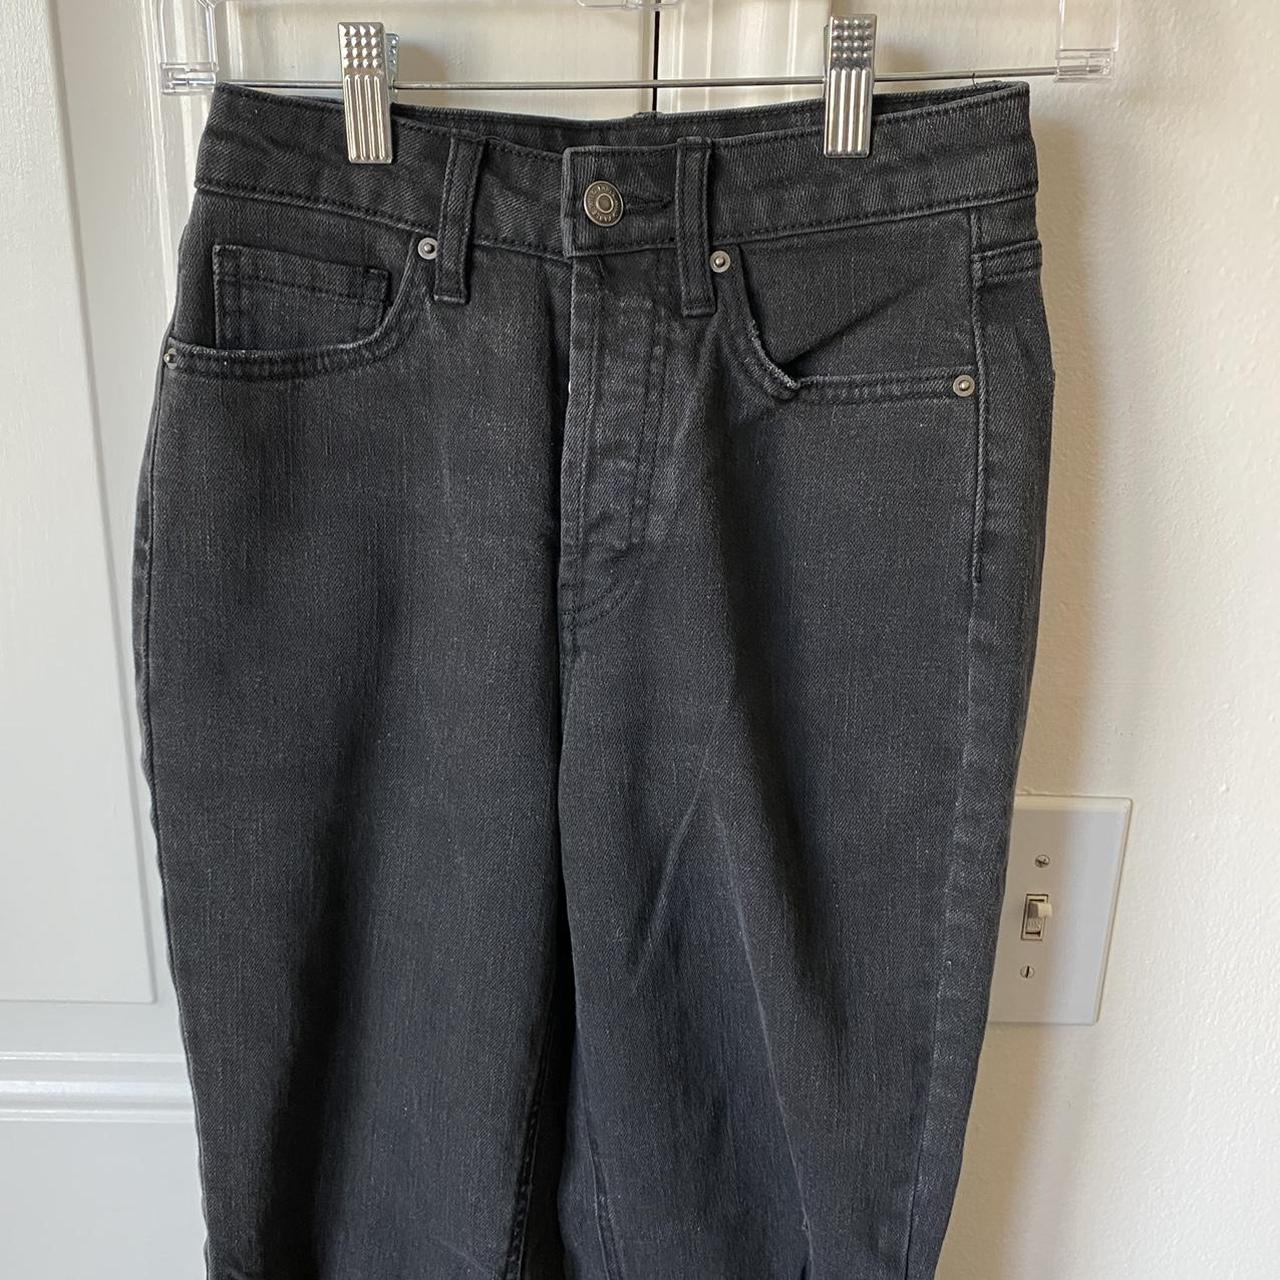 Wild fable jeans. Size 0.